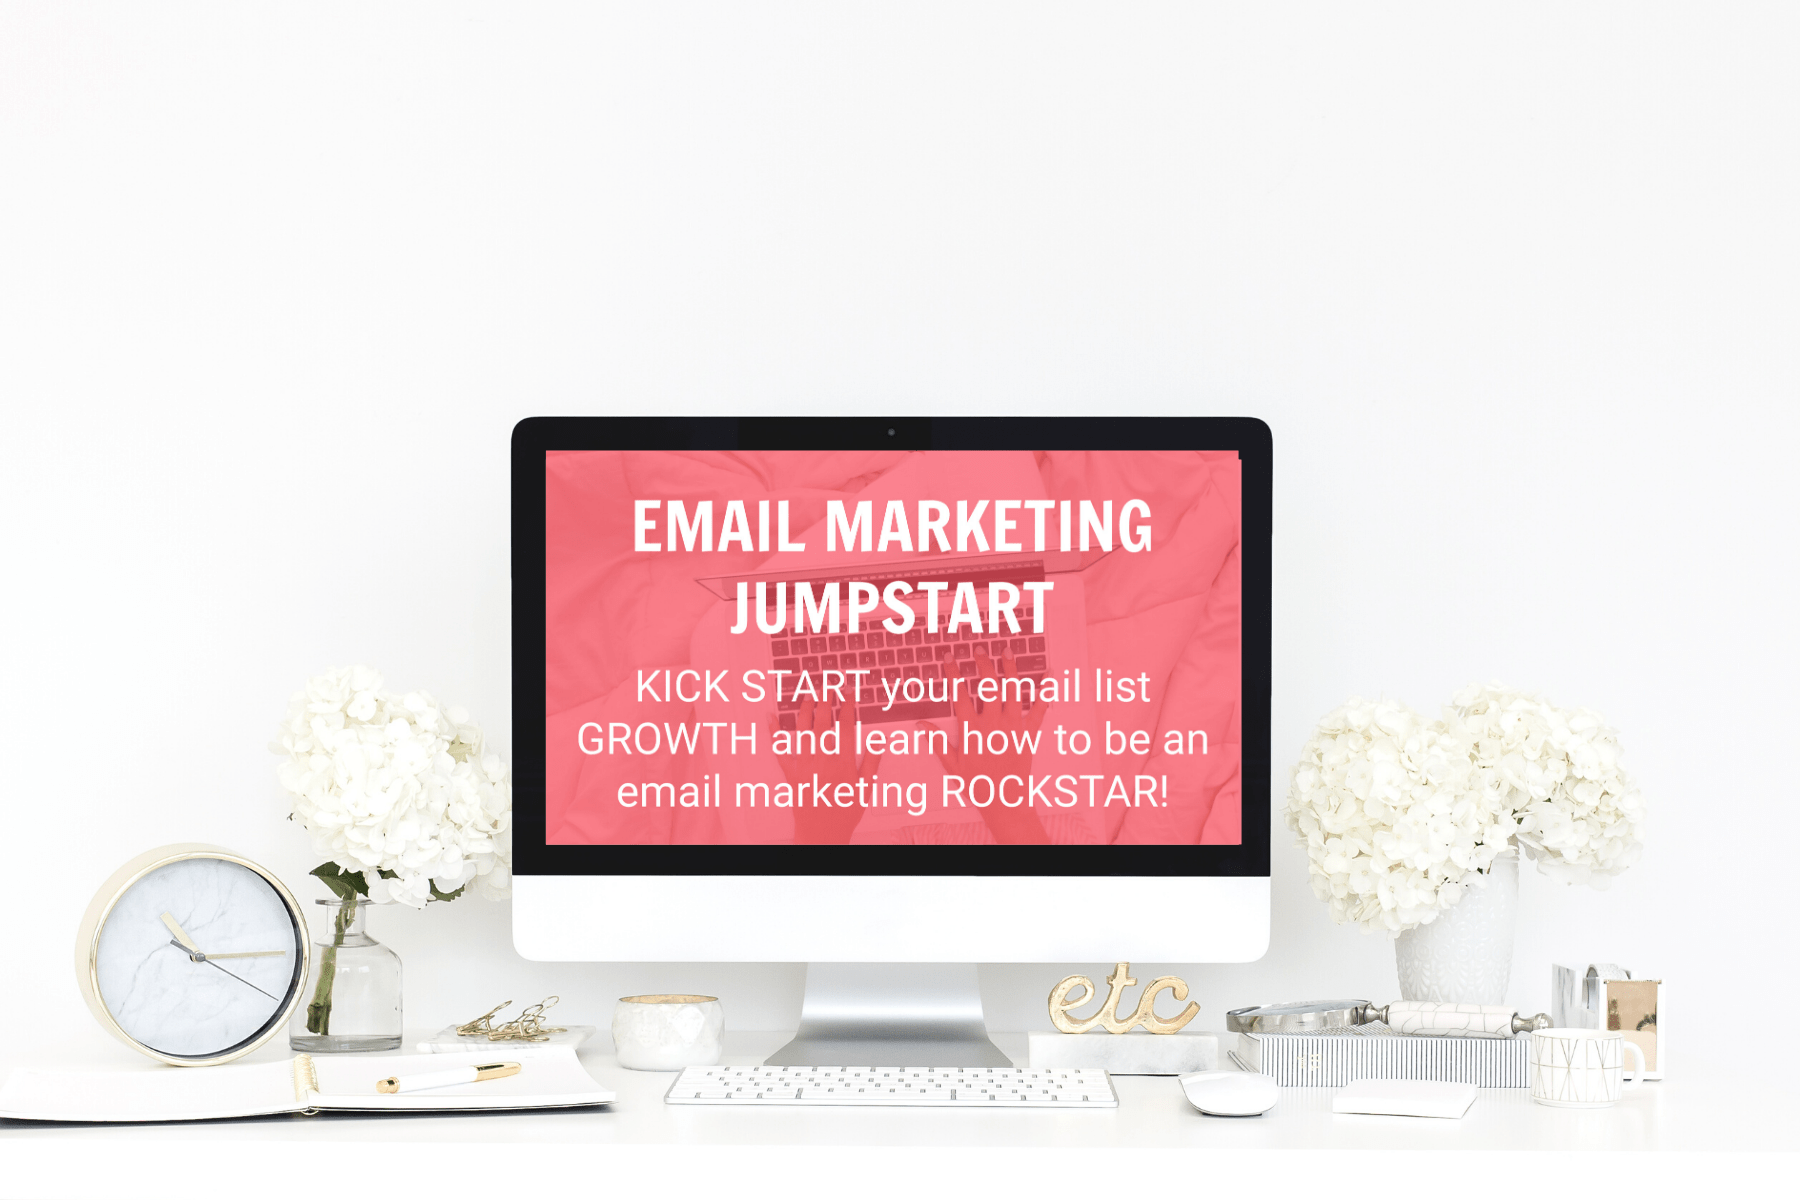 Email Marketing Jumpstart Course – KICK START your email list GROWTH and learn how to be an email marketing ROCKSTAR!